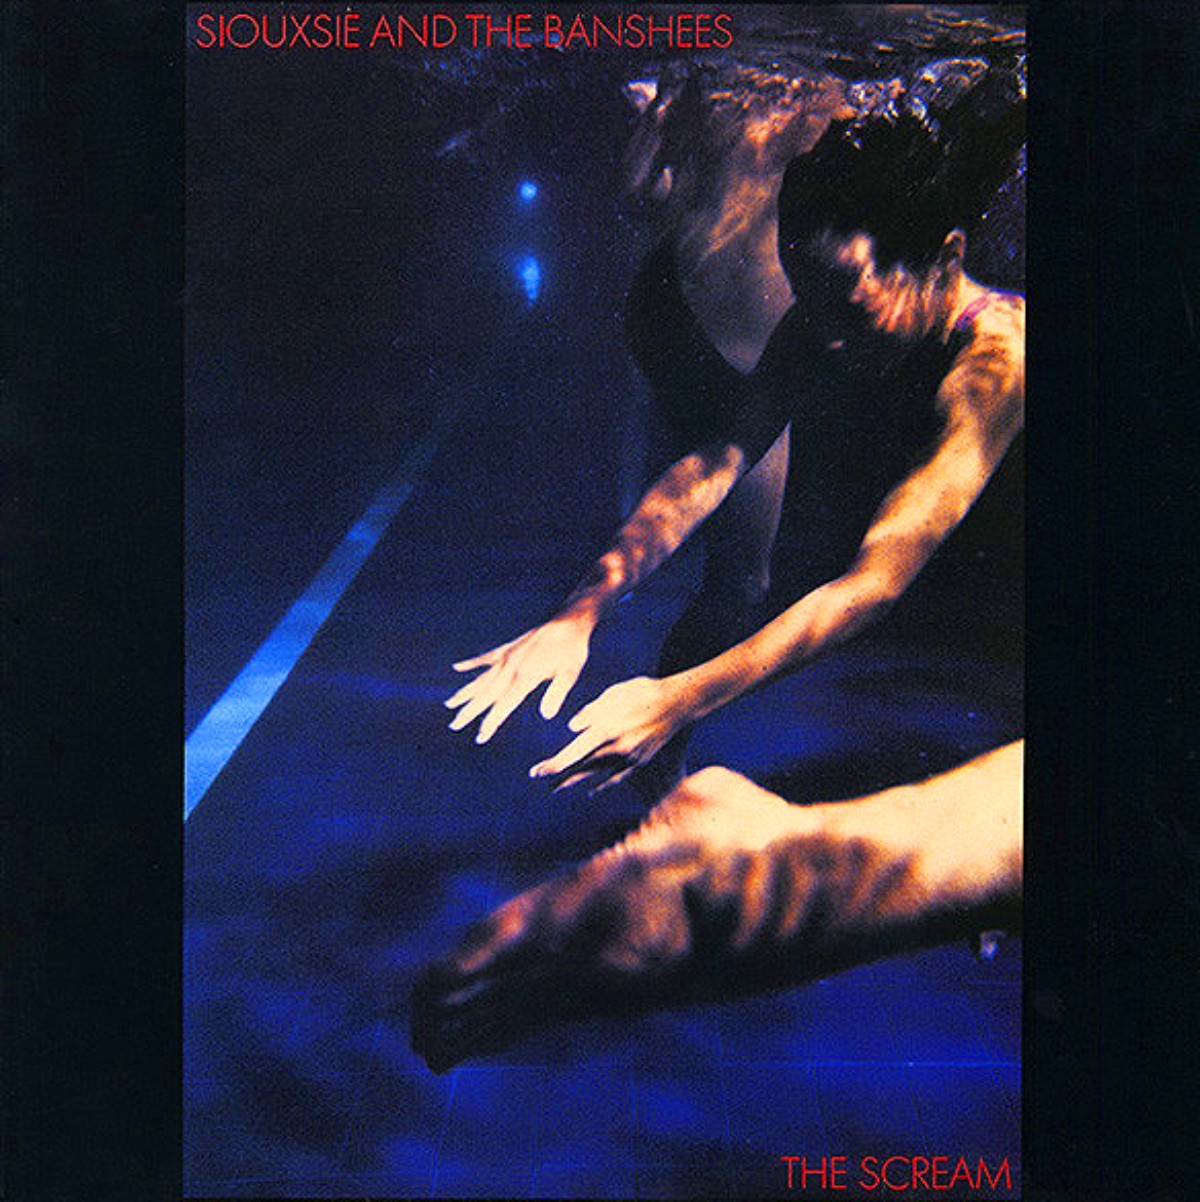 Siouxsie And The Banshees，专辑“The Scream”（1978）